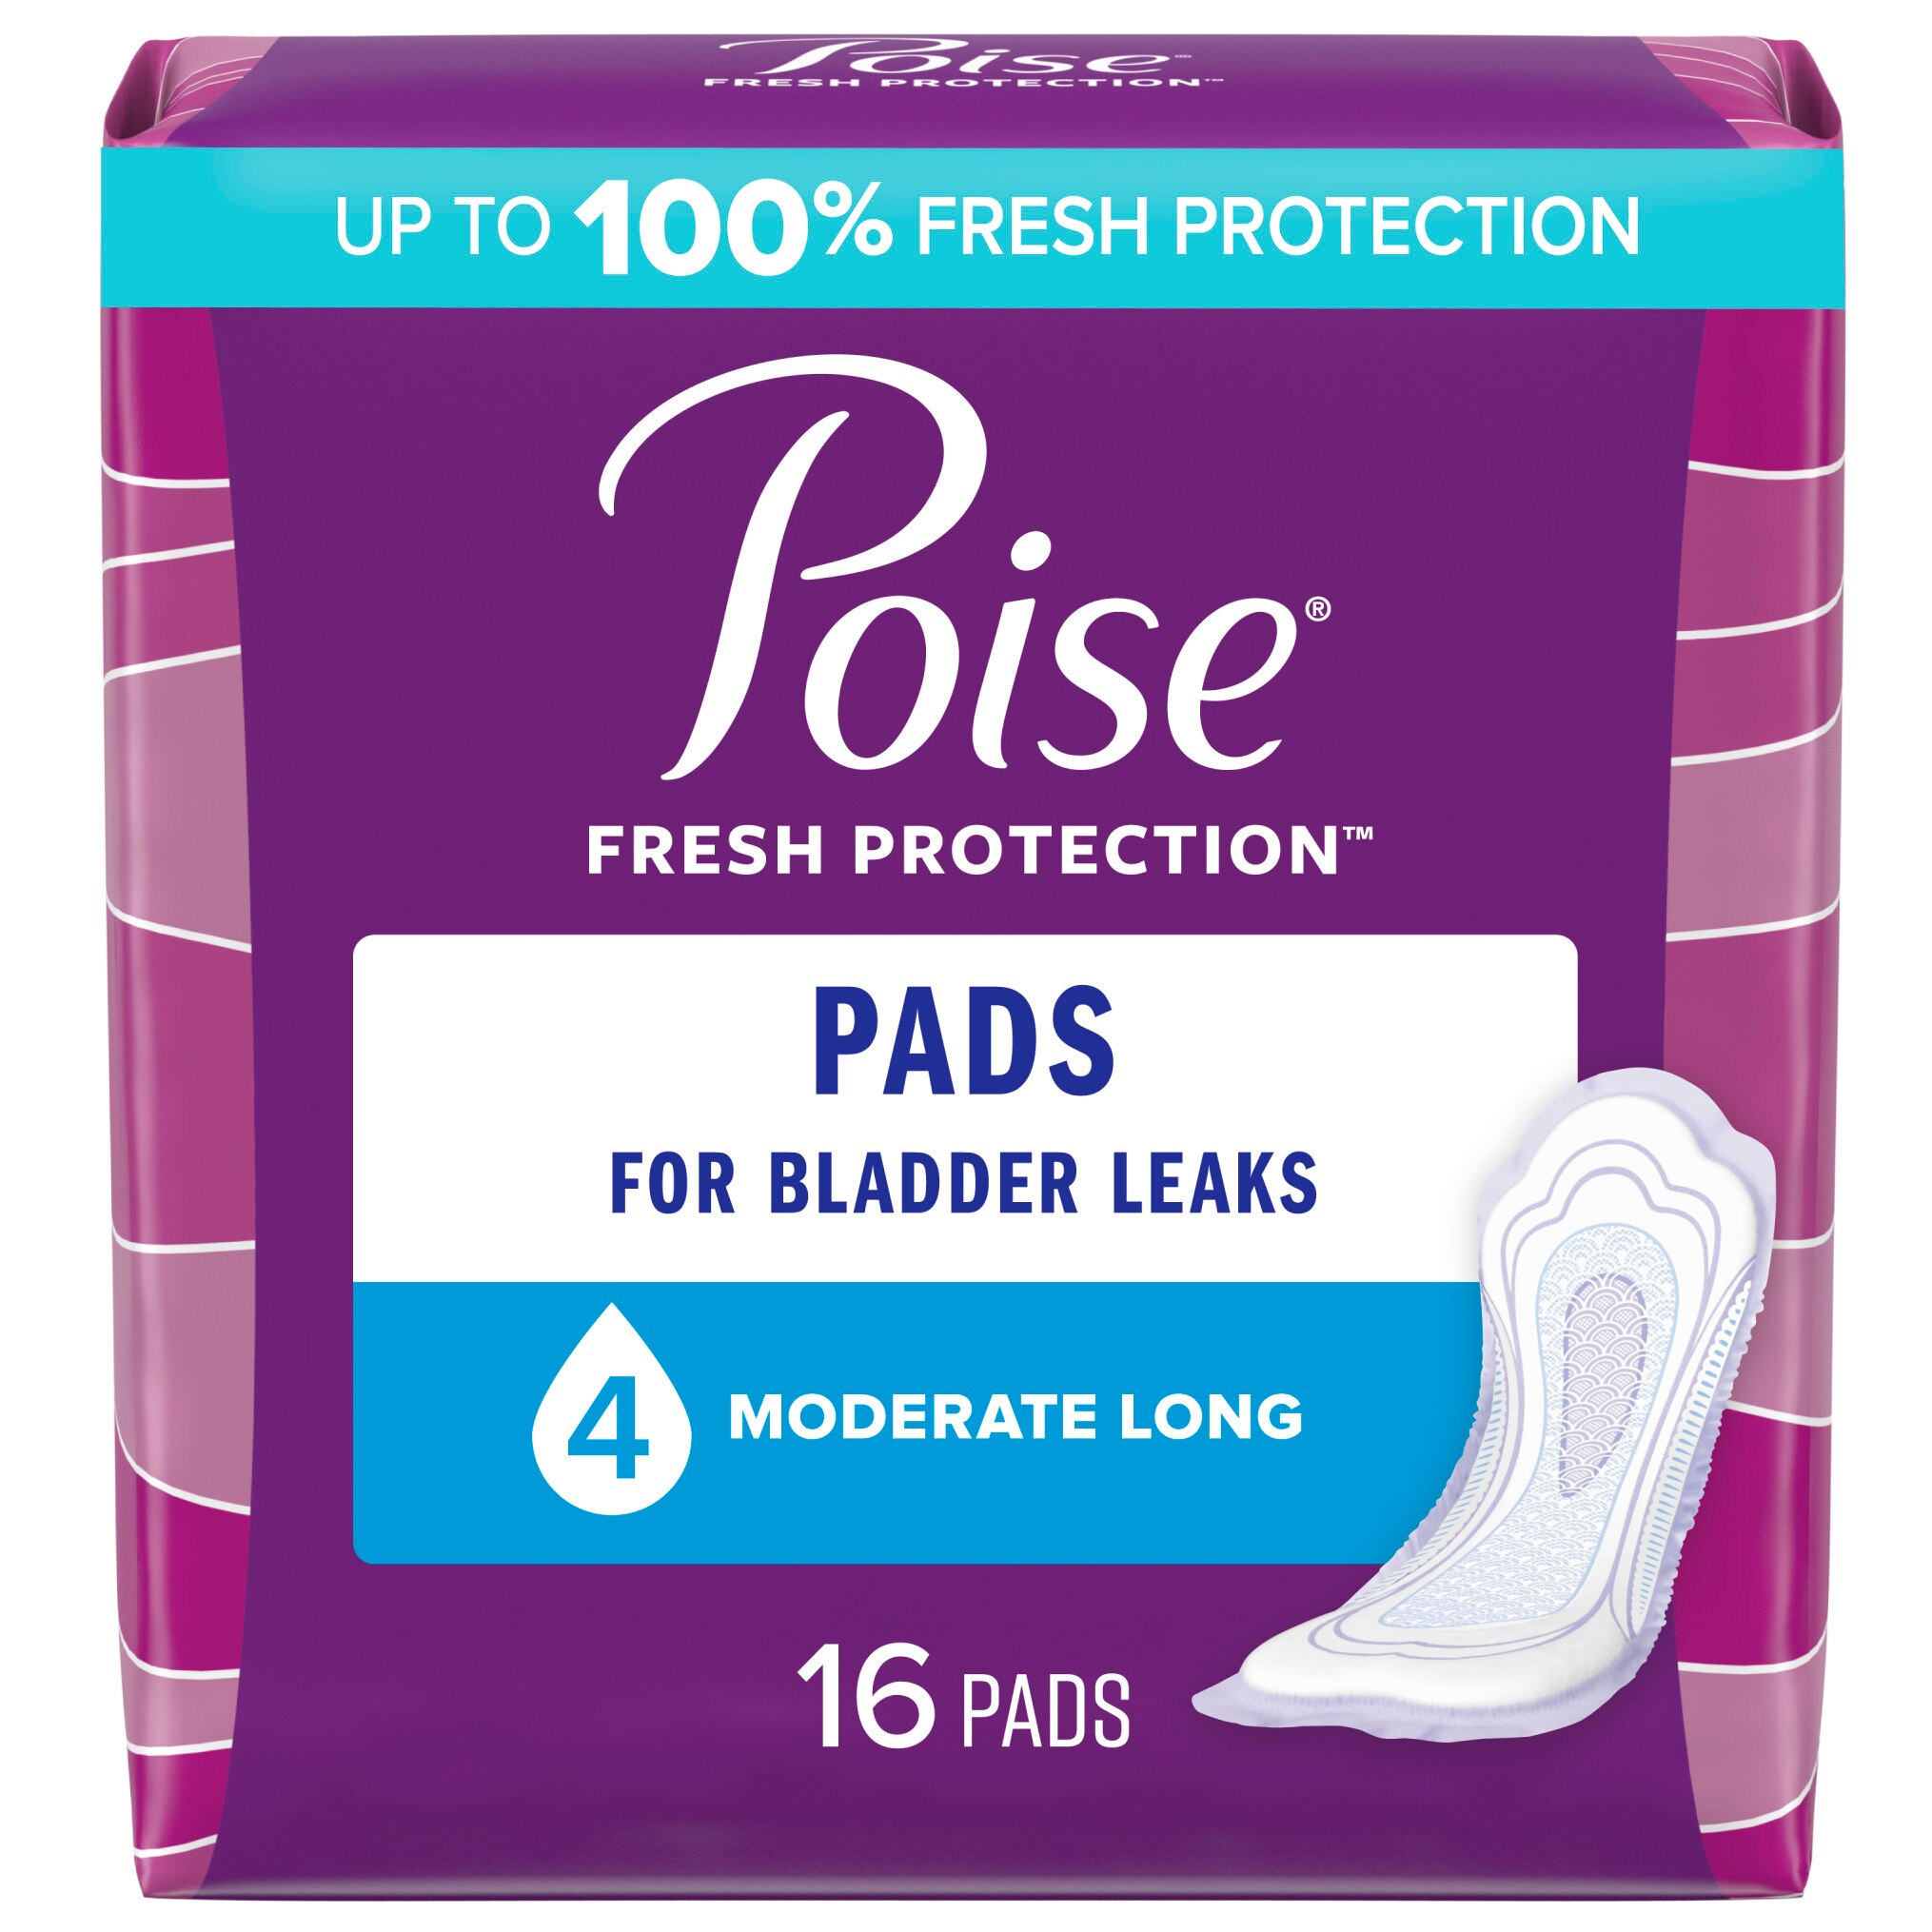 Poise Incontinence Pads Moderate Absorbency